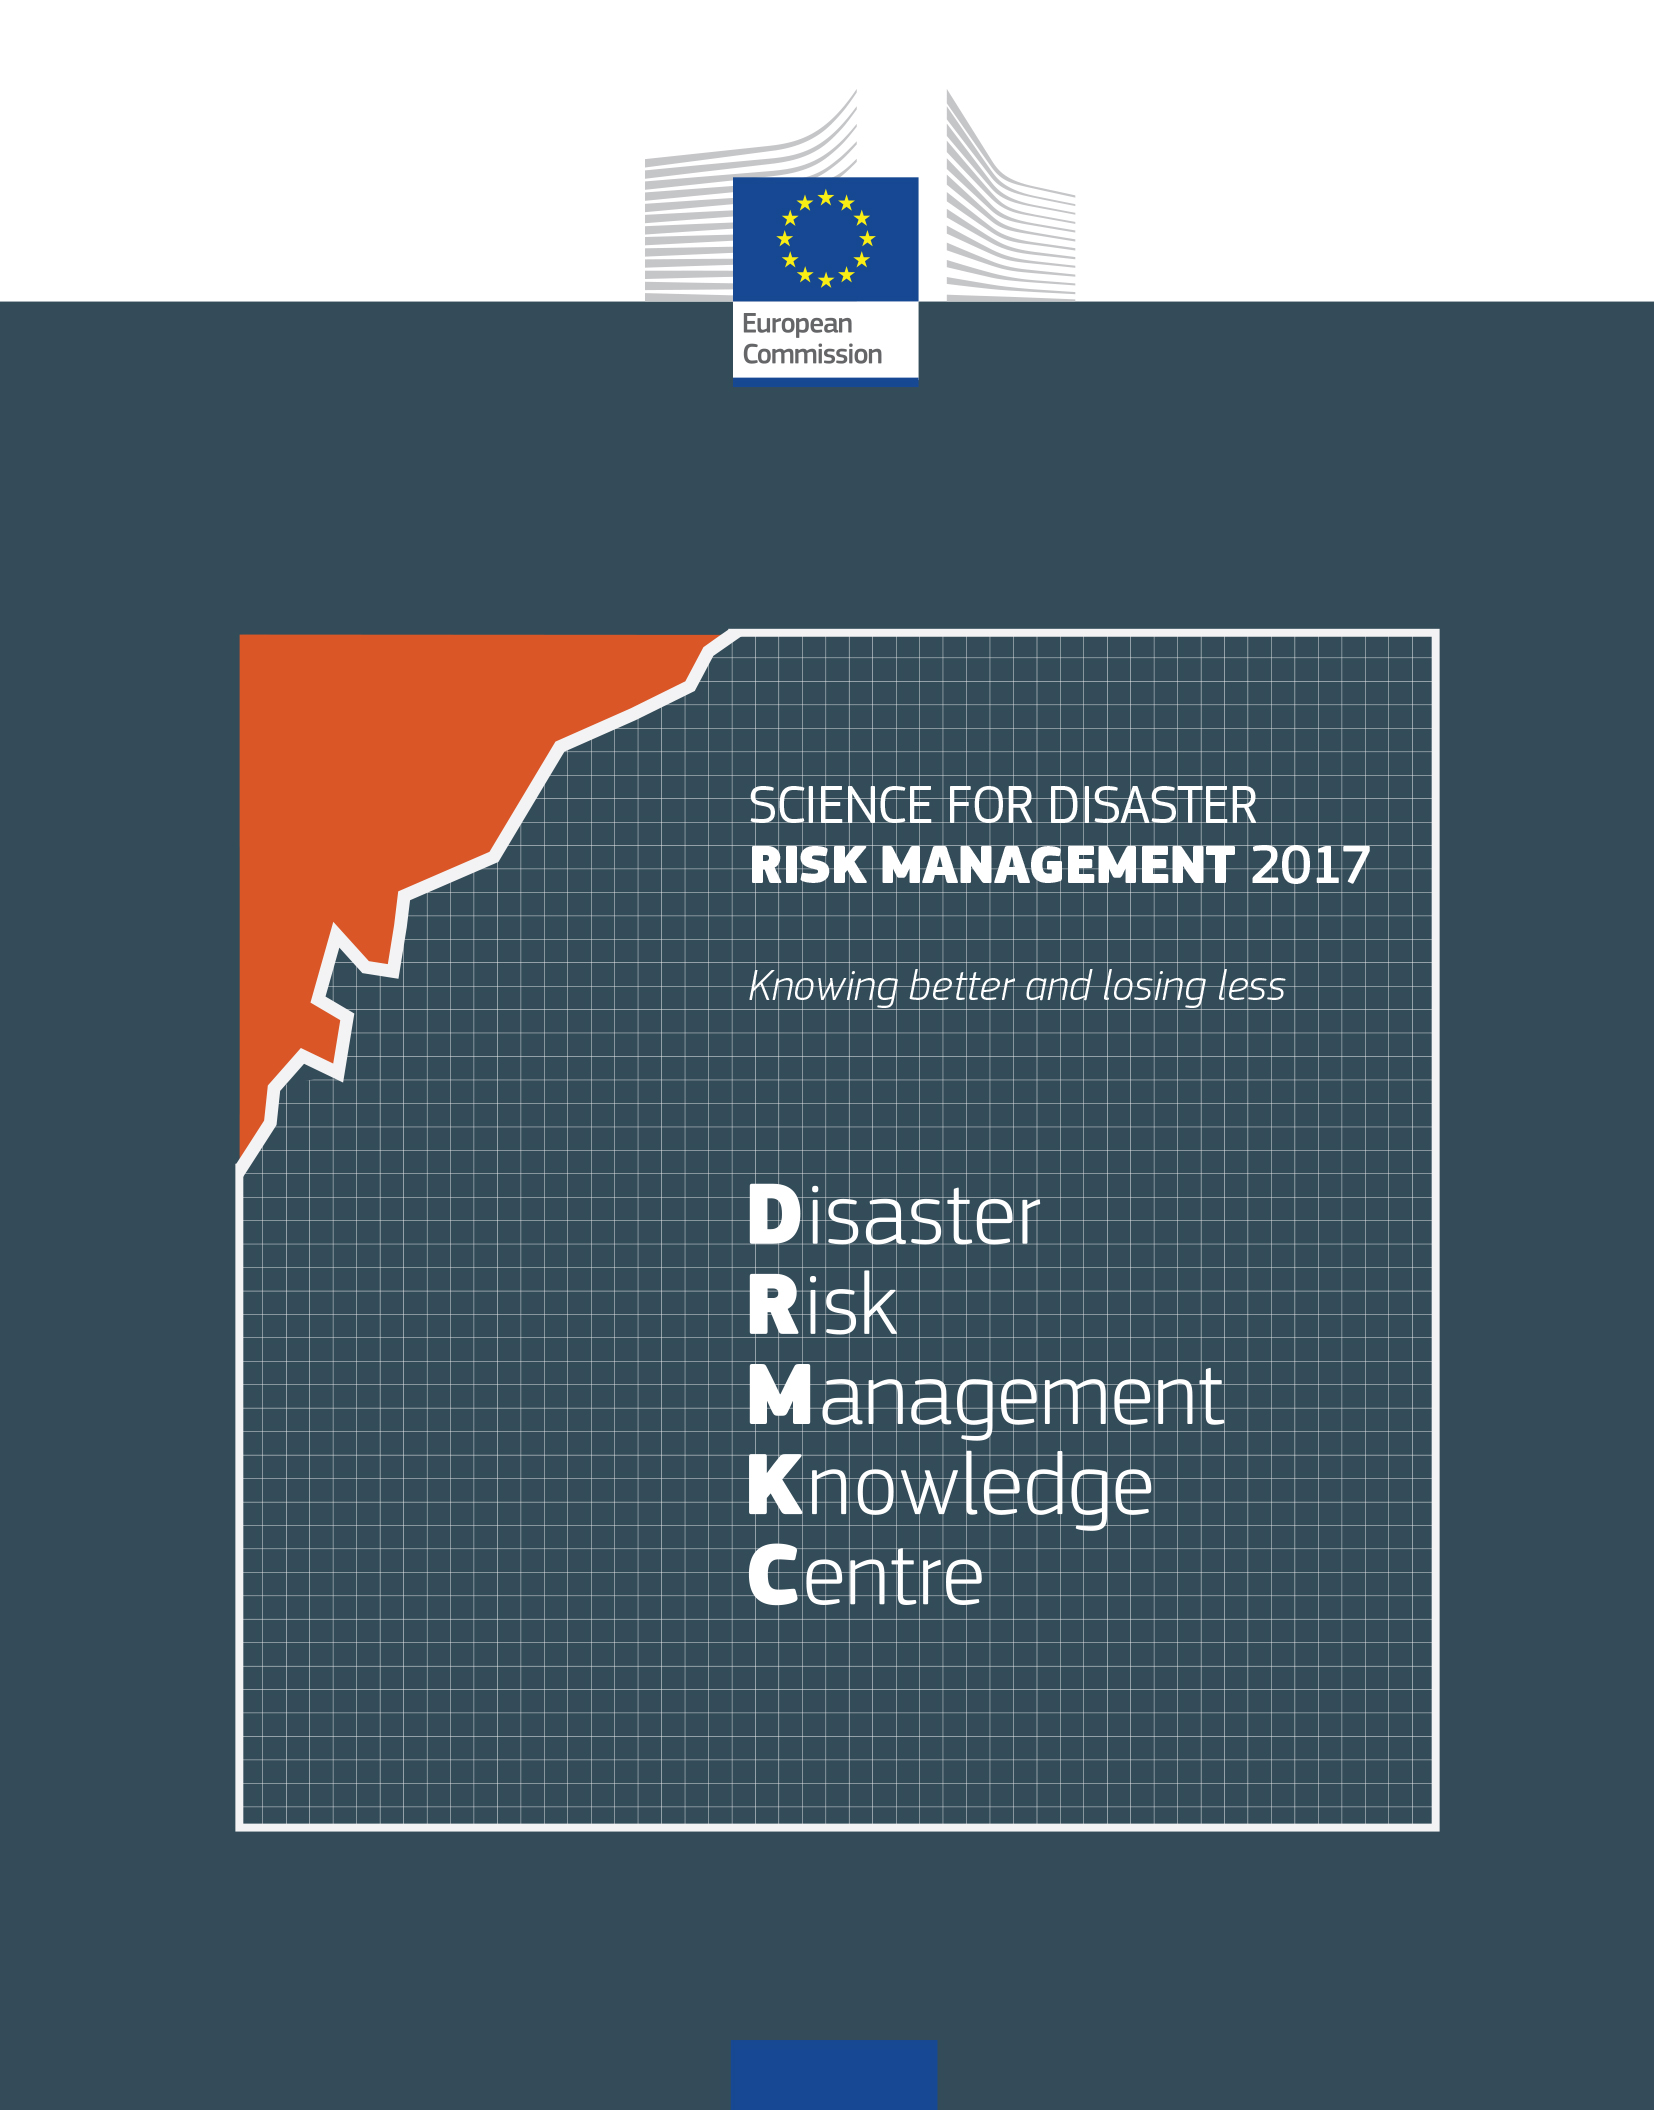 Science for disaster risk management 2017 report